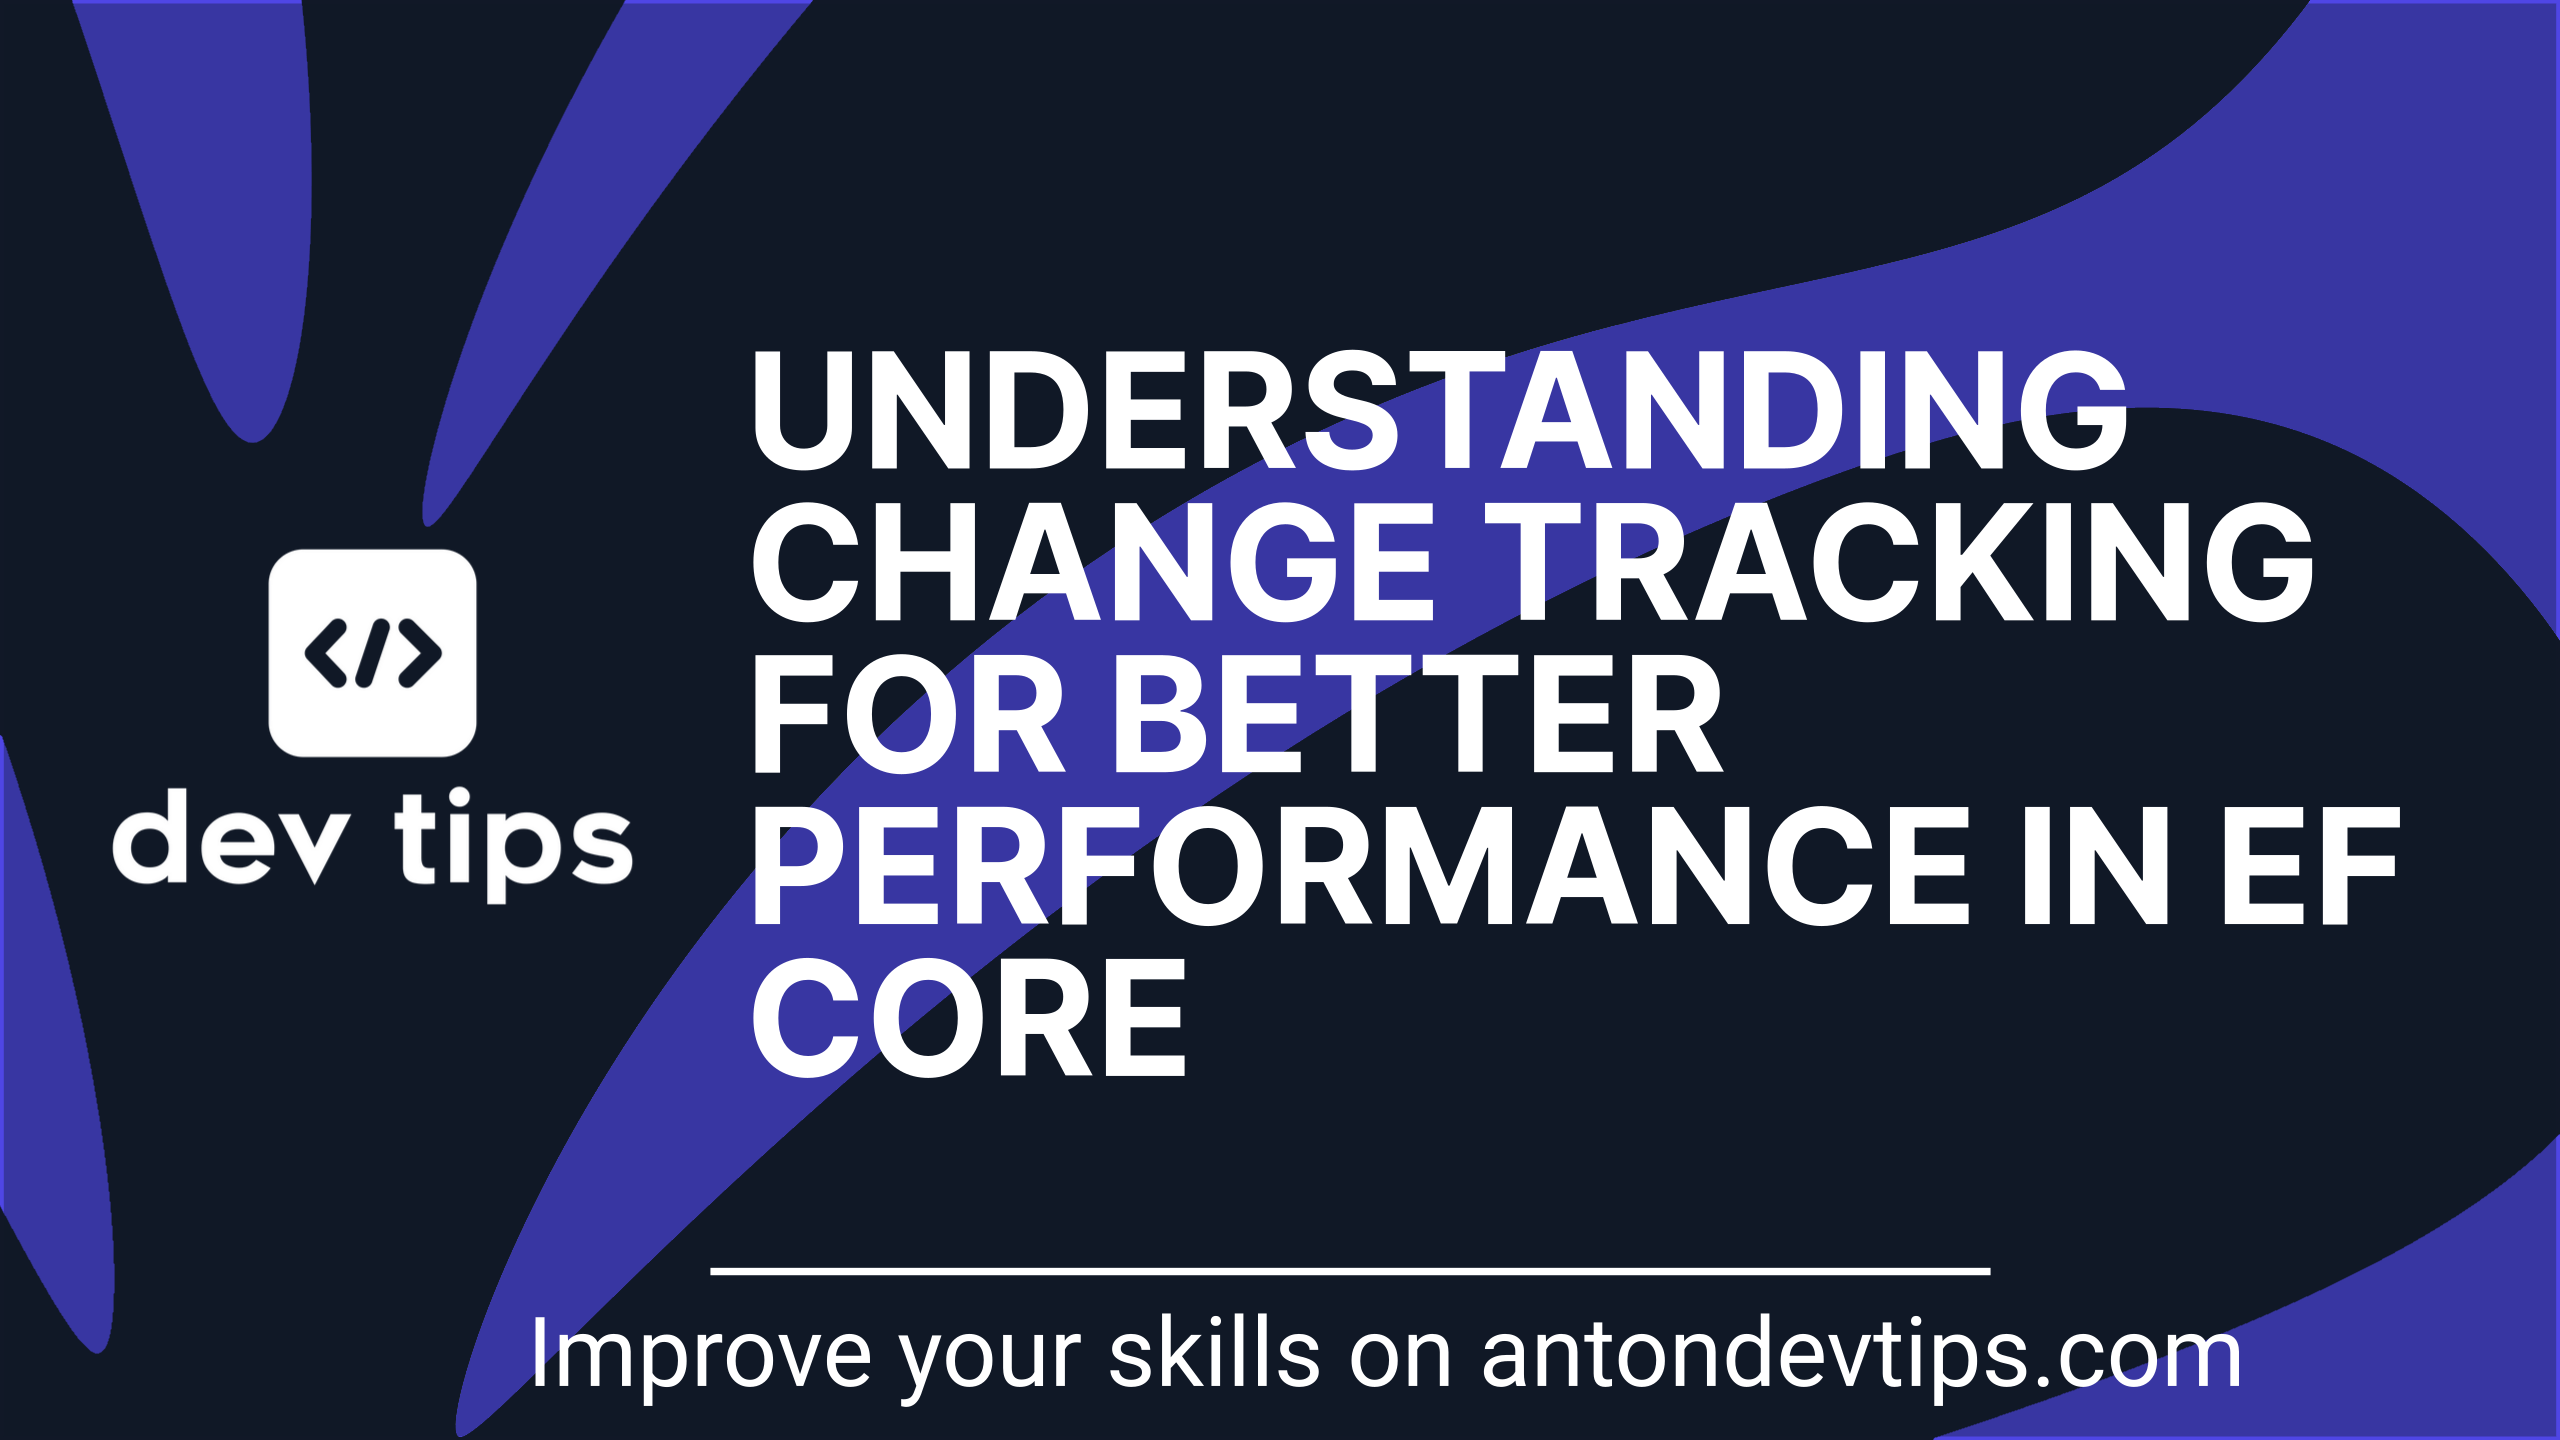 Understanding Change Tracking for Better Performance in EF Core